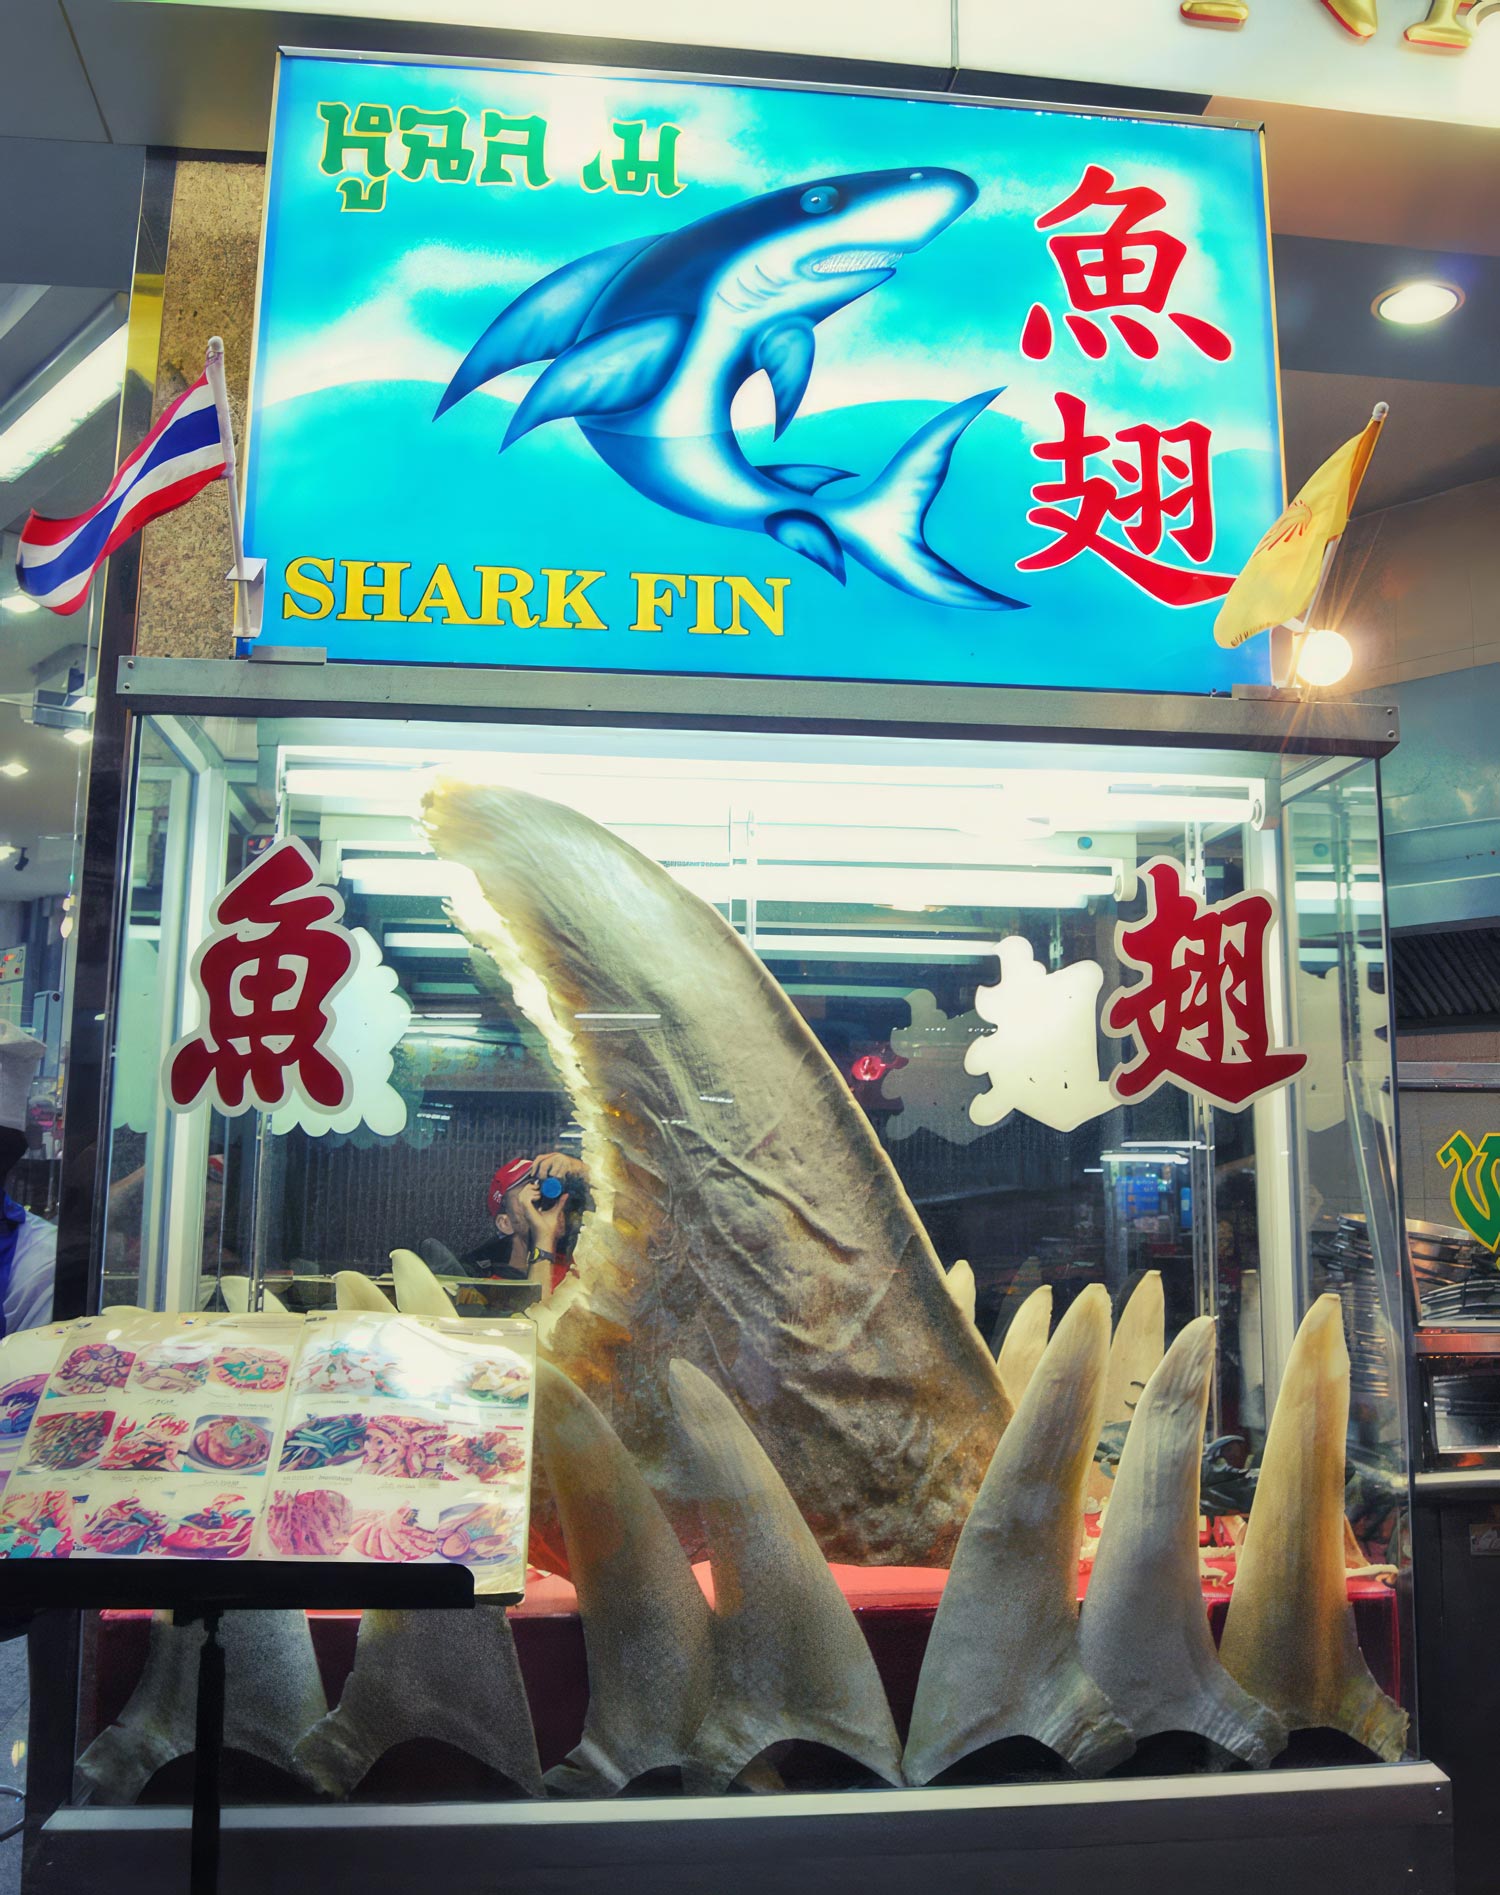 Canada becomes first G20 country to ban trade in shark fins - The